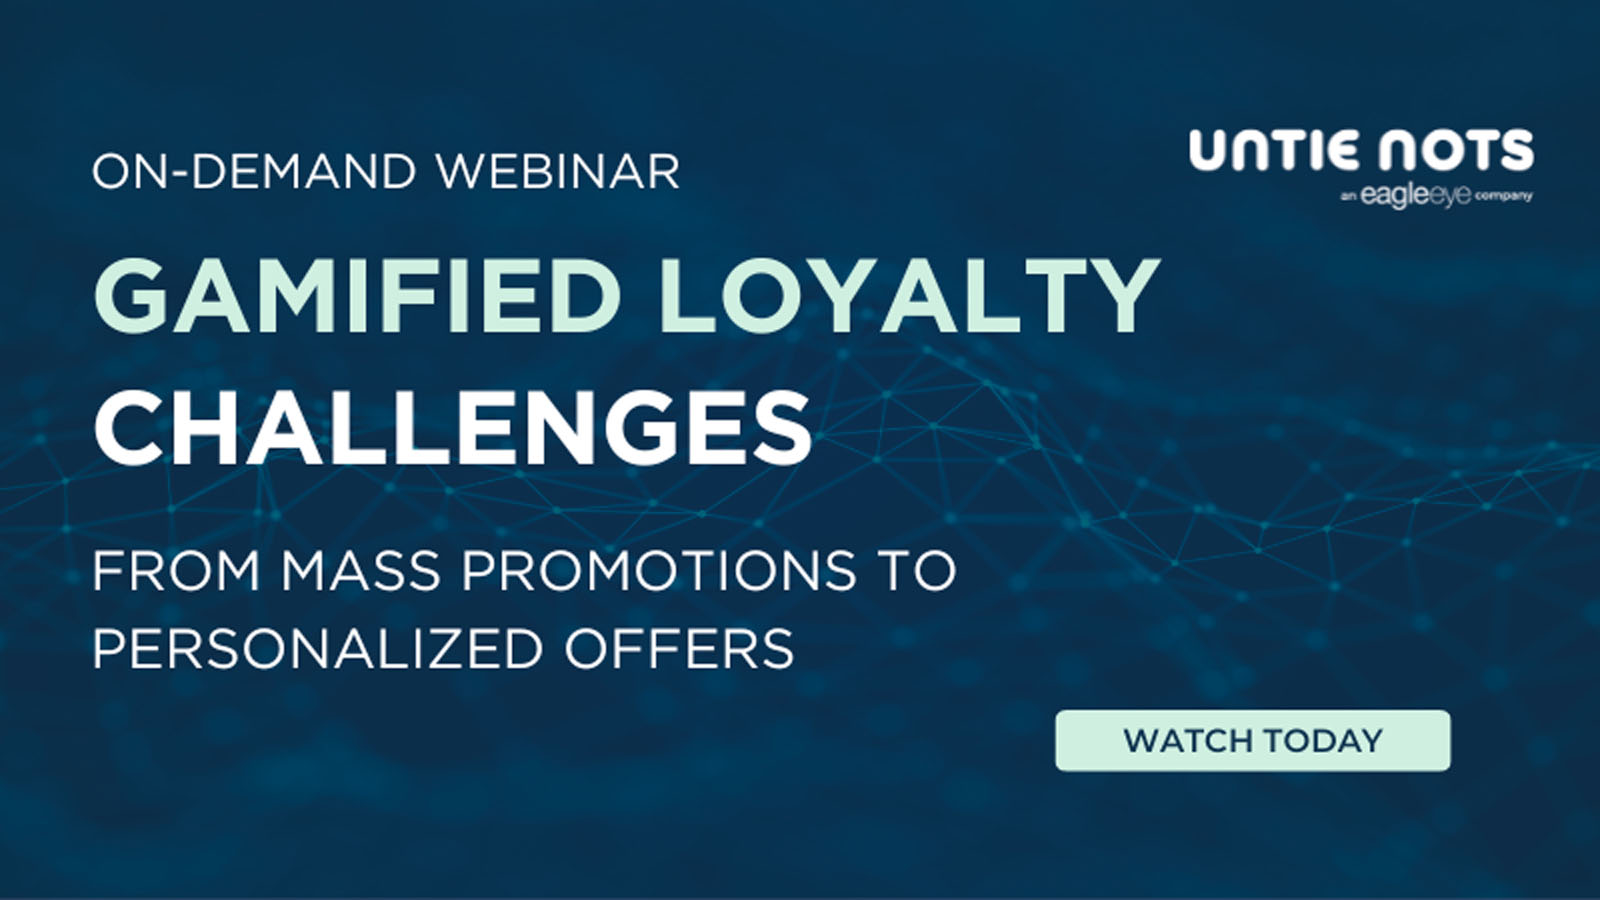 Gamified Loyalty Challenges on-demand webinar